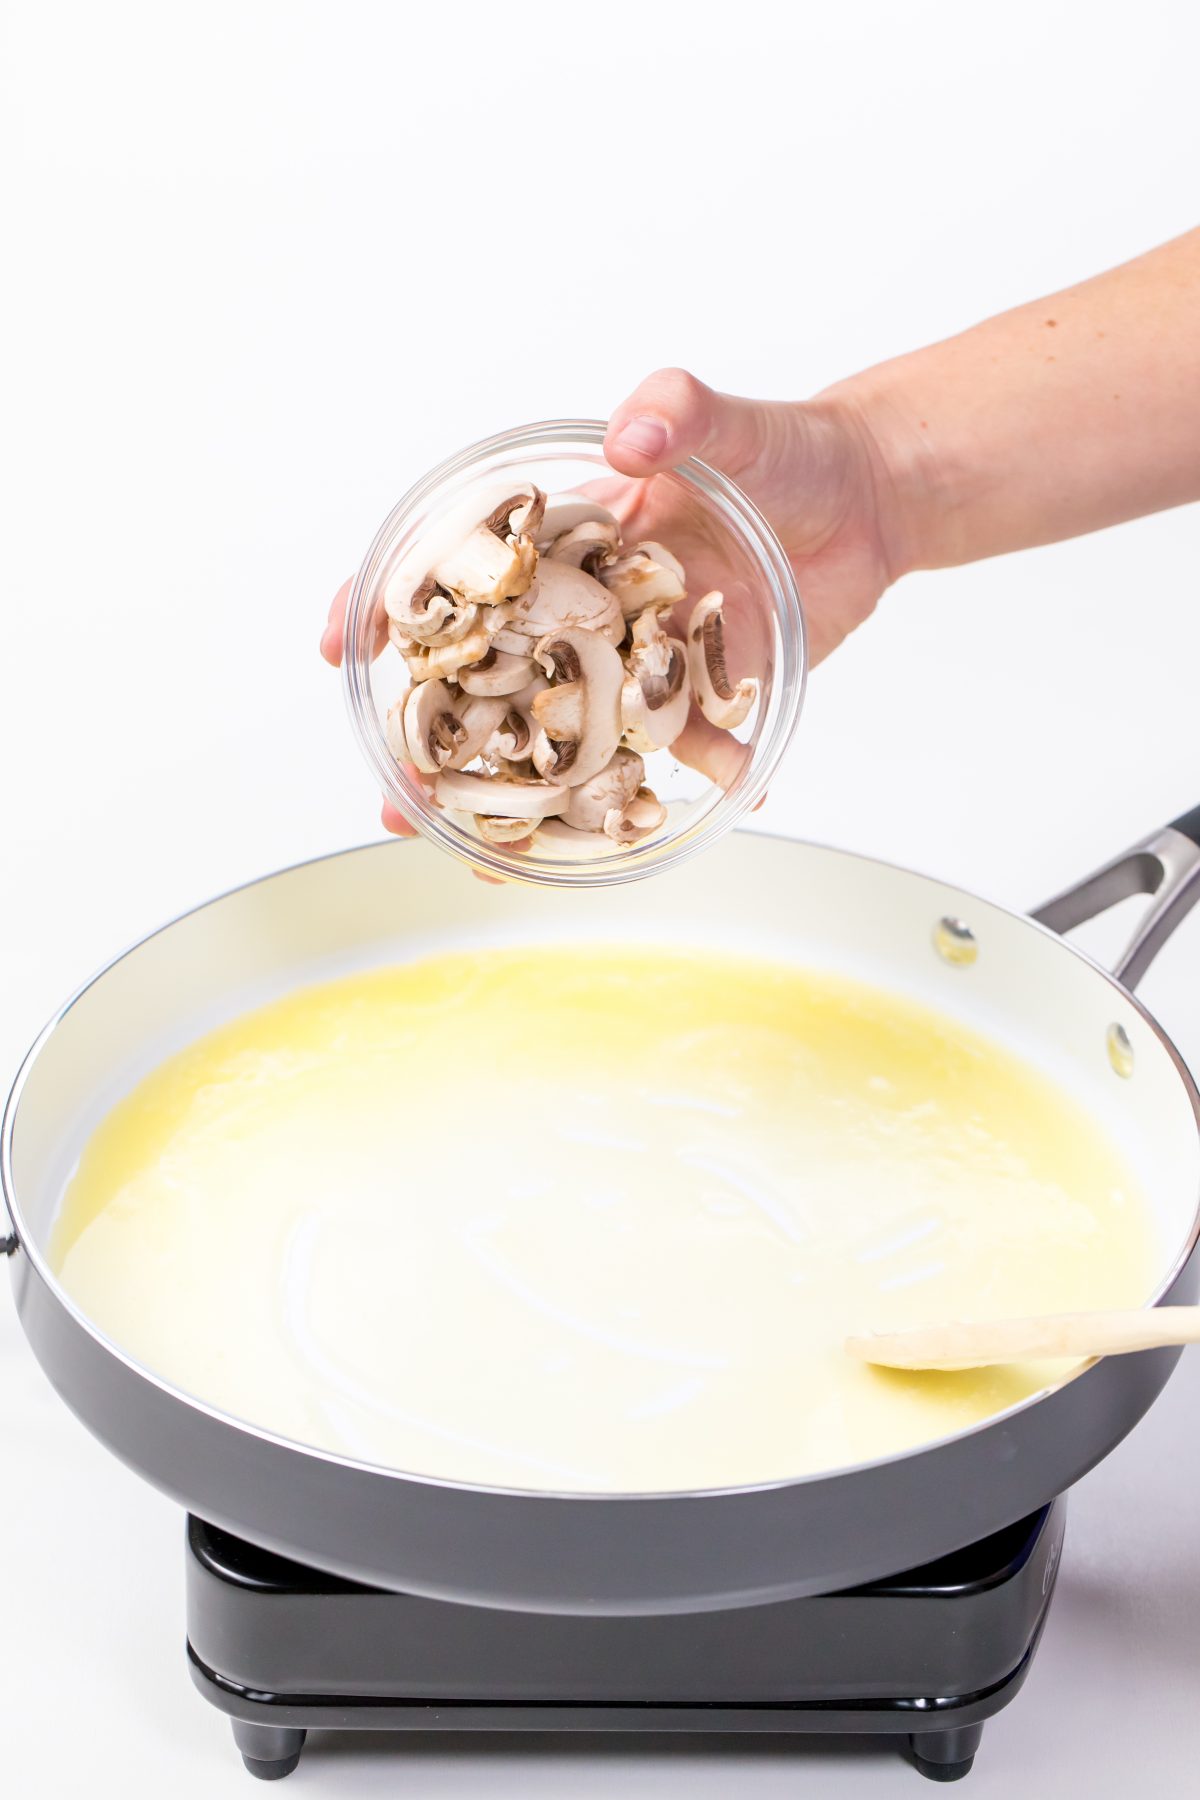 Add mushrooms to melted butter